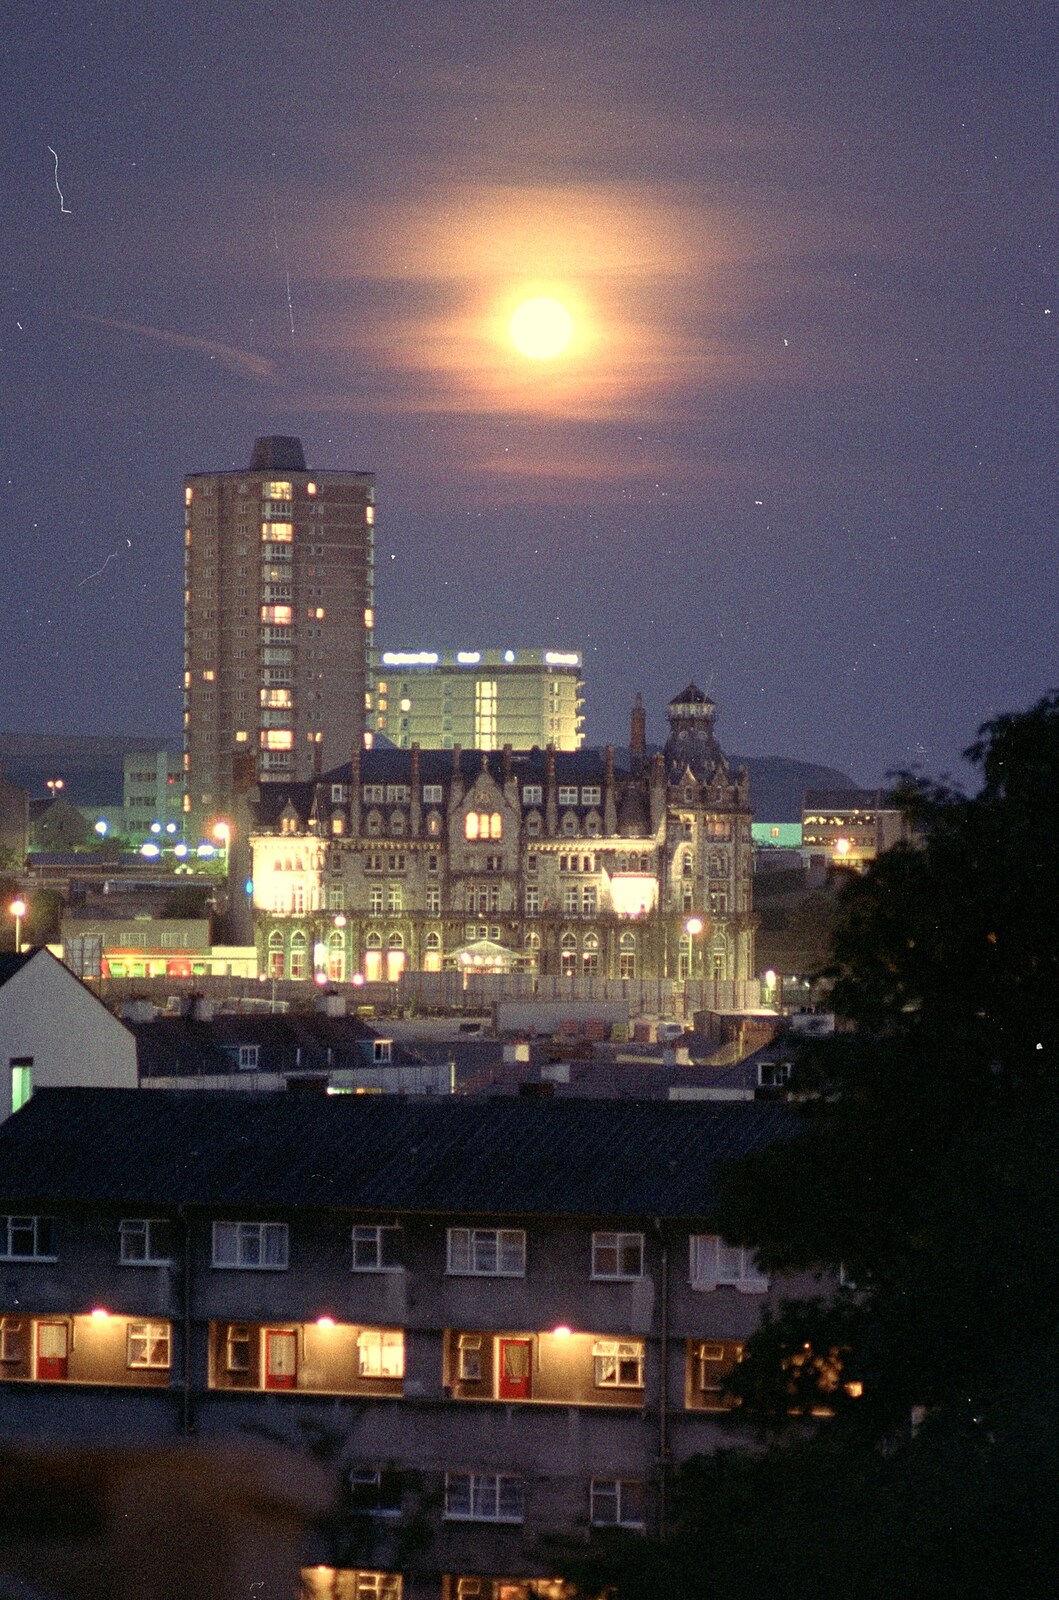 Moonrise over the Academy on Union Street from Uni: A Trip to Mount Edgcumbe, Cornwall - 17th June 1989